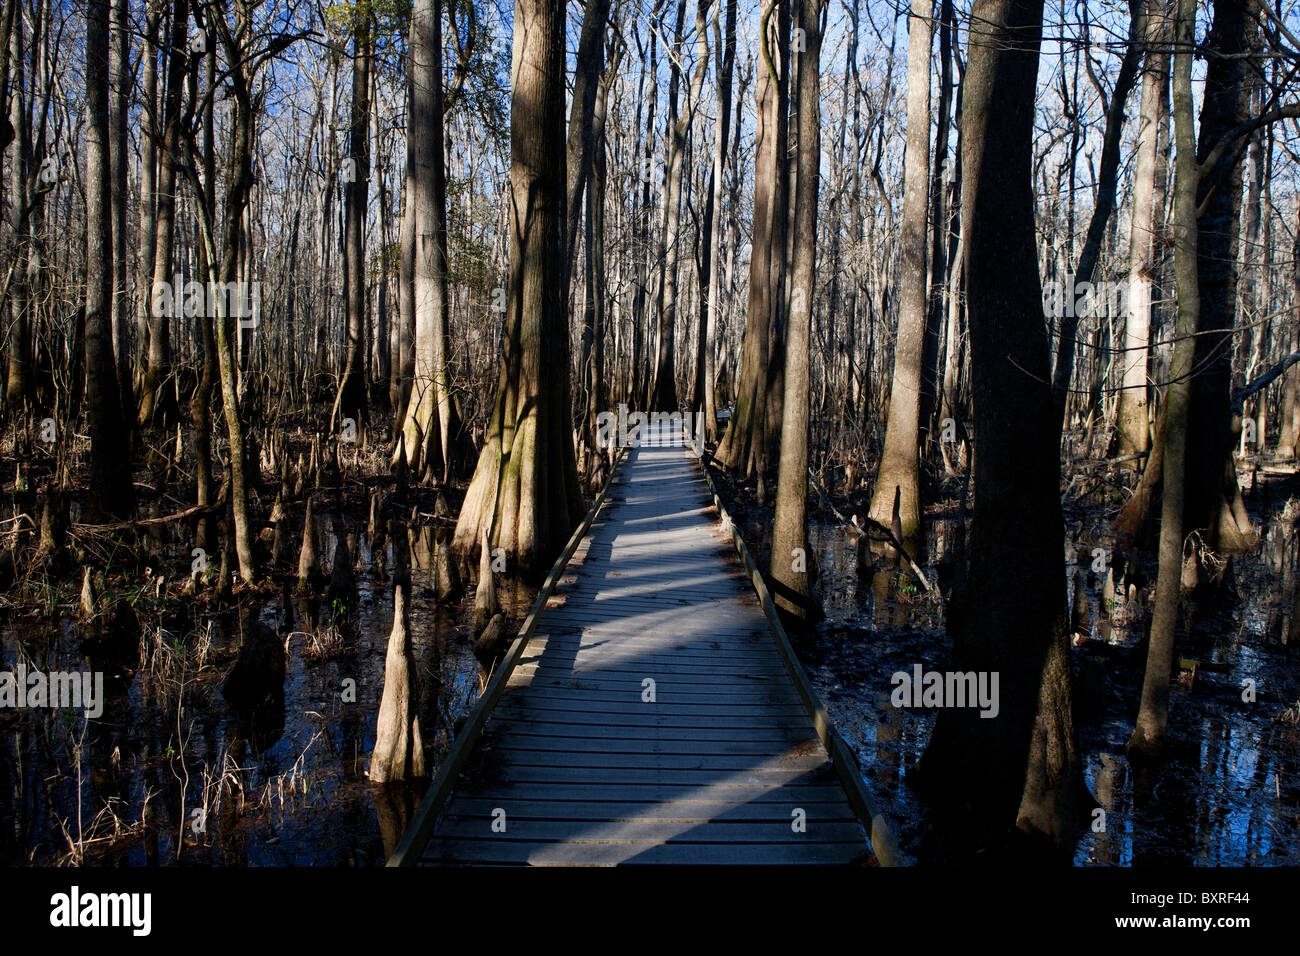 Boardwalk surrounded by trees and flooded swamp forest floor, Congaree National Park, South Carolina, United States of America Stock Photo